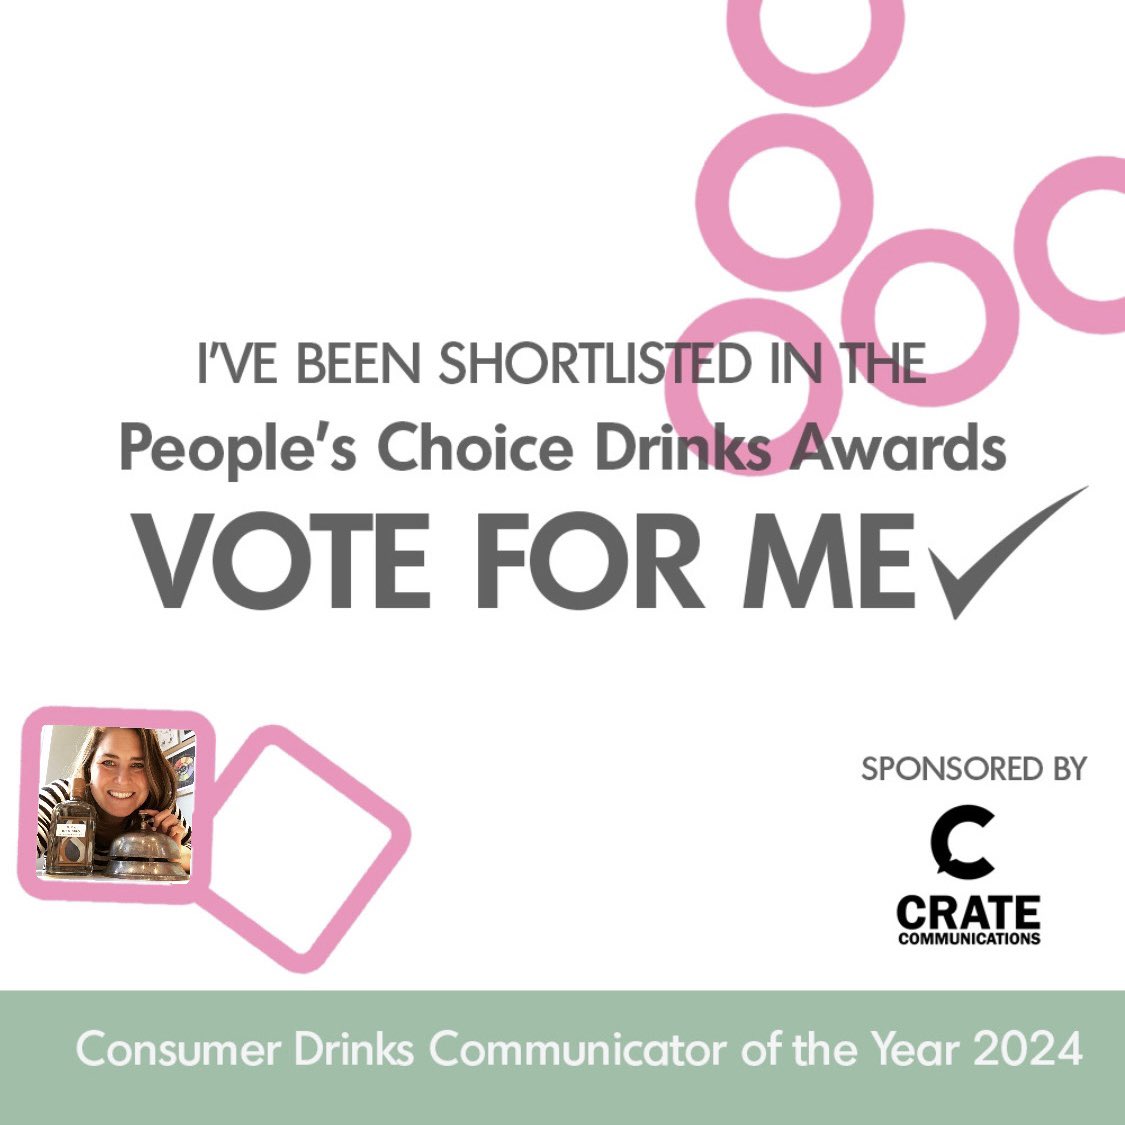 Today is your last chance to vote for me to win Consumer Drinks Communicator of the Year in the People's Choice Drinks Awards, so l'd be really grateful if you did! Pretty please? peopleschoicedrinksawards.com/vote-communica…